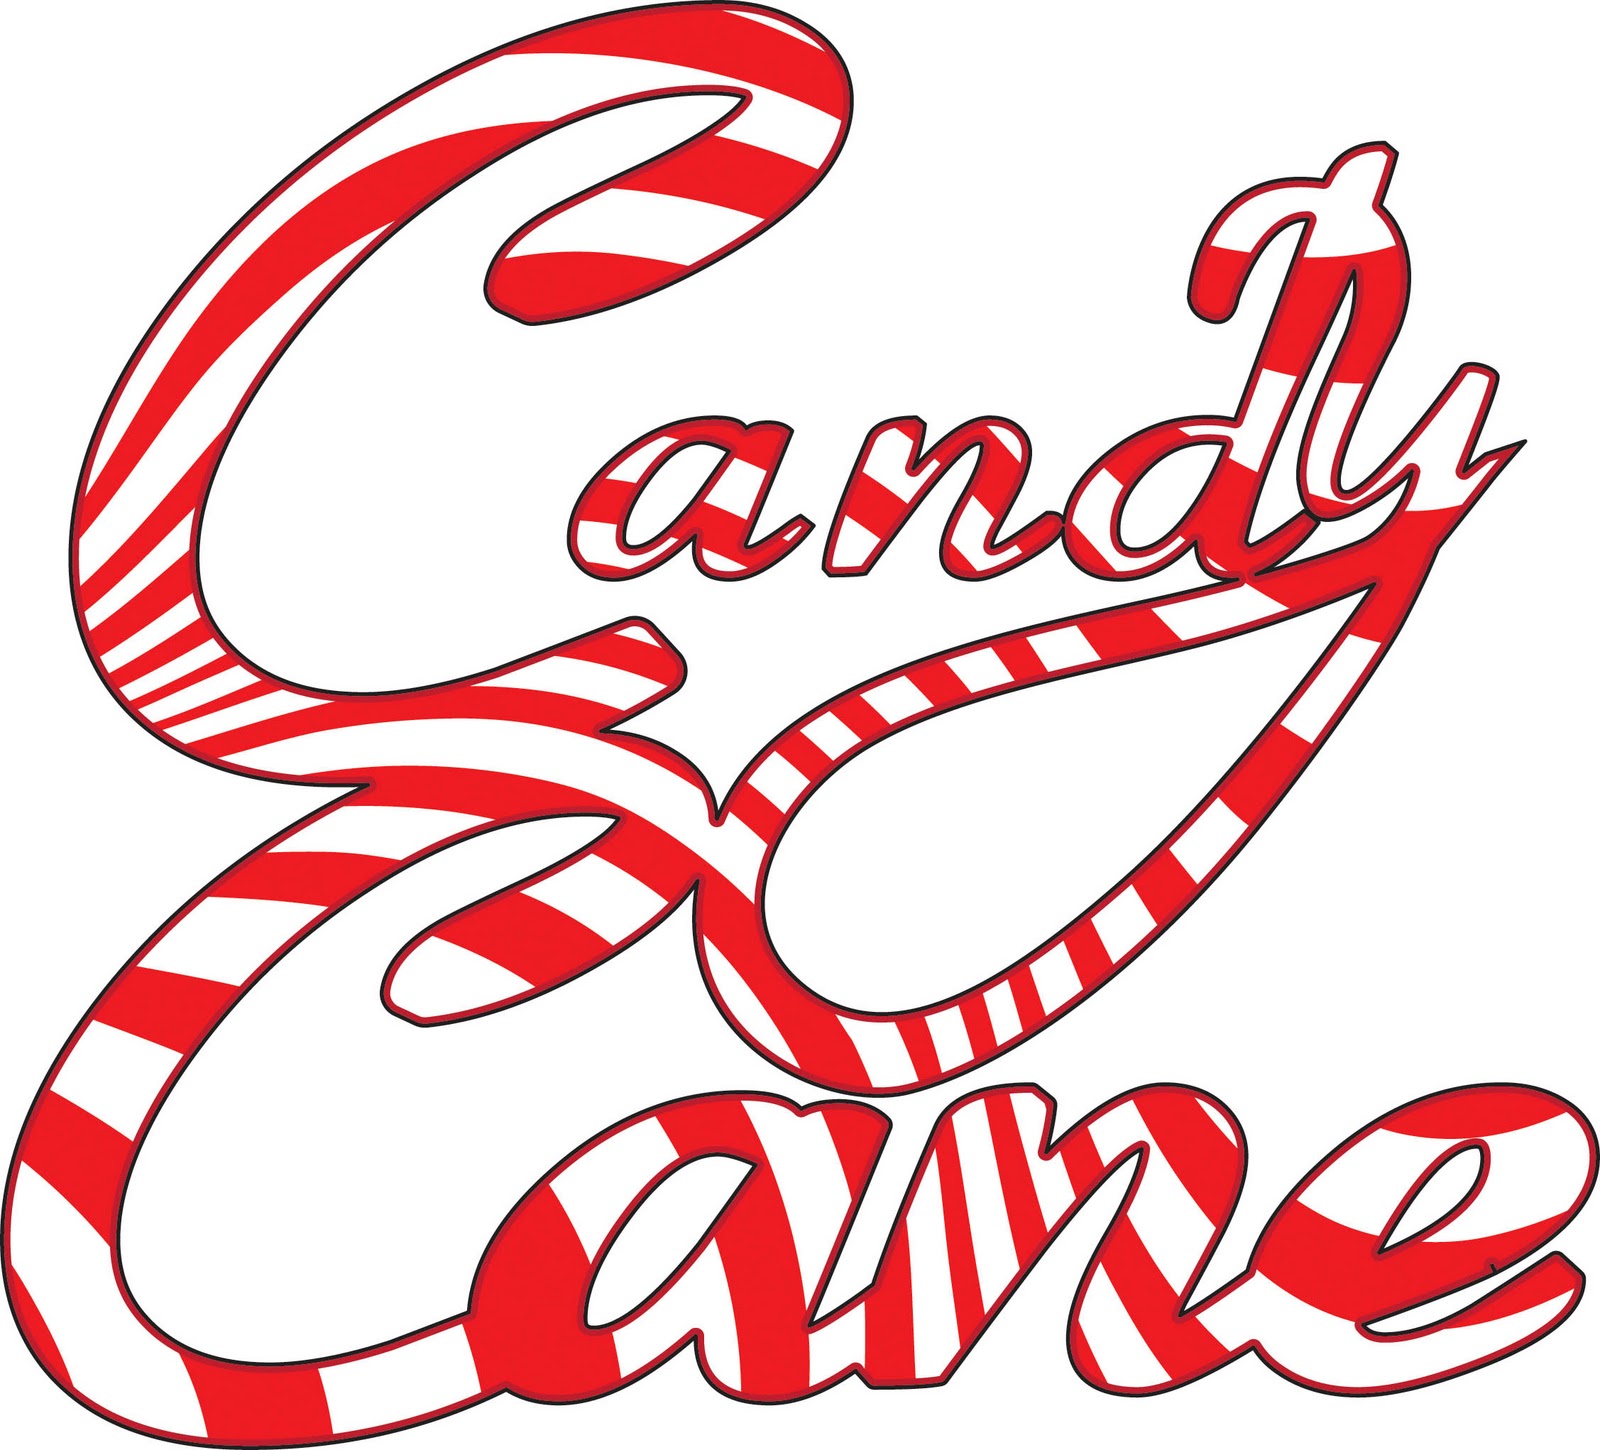 Candy cane clipart border 